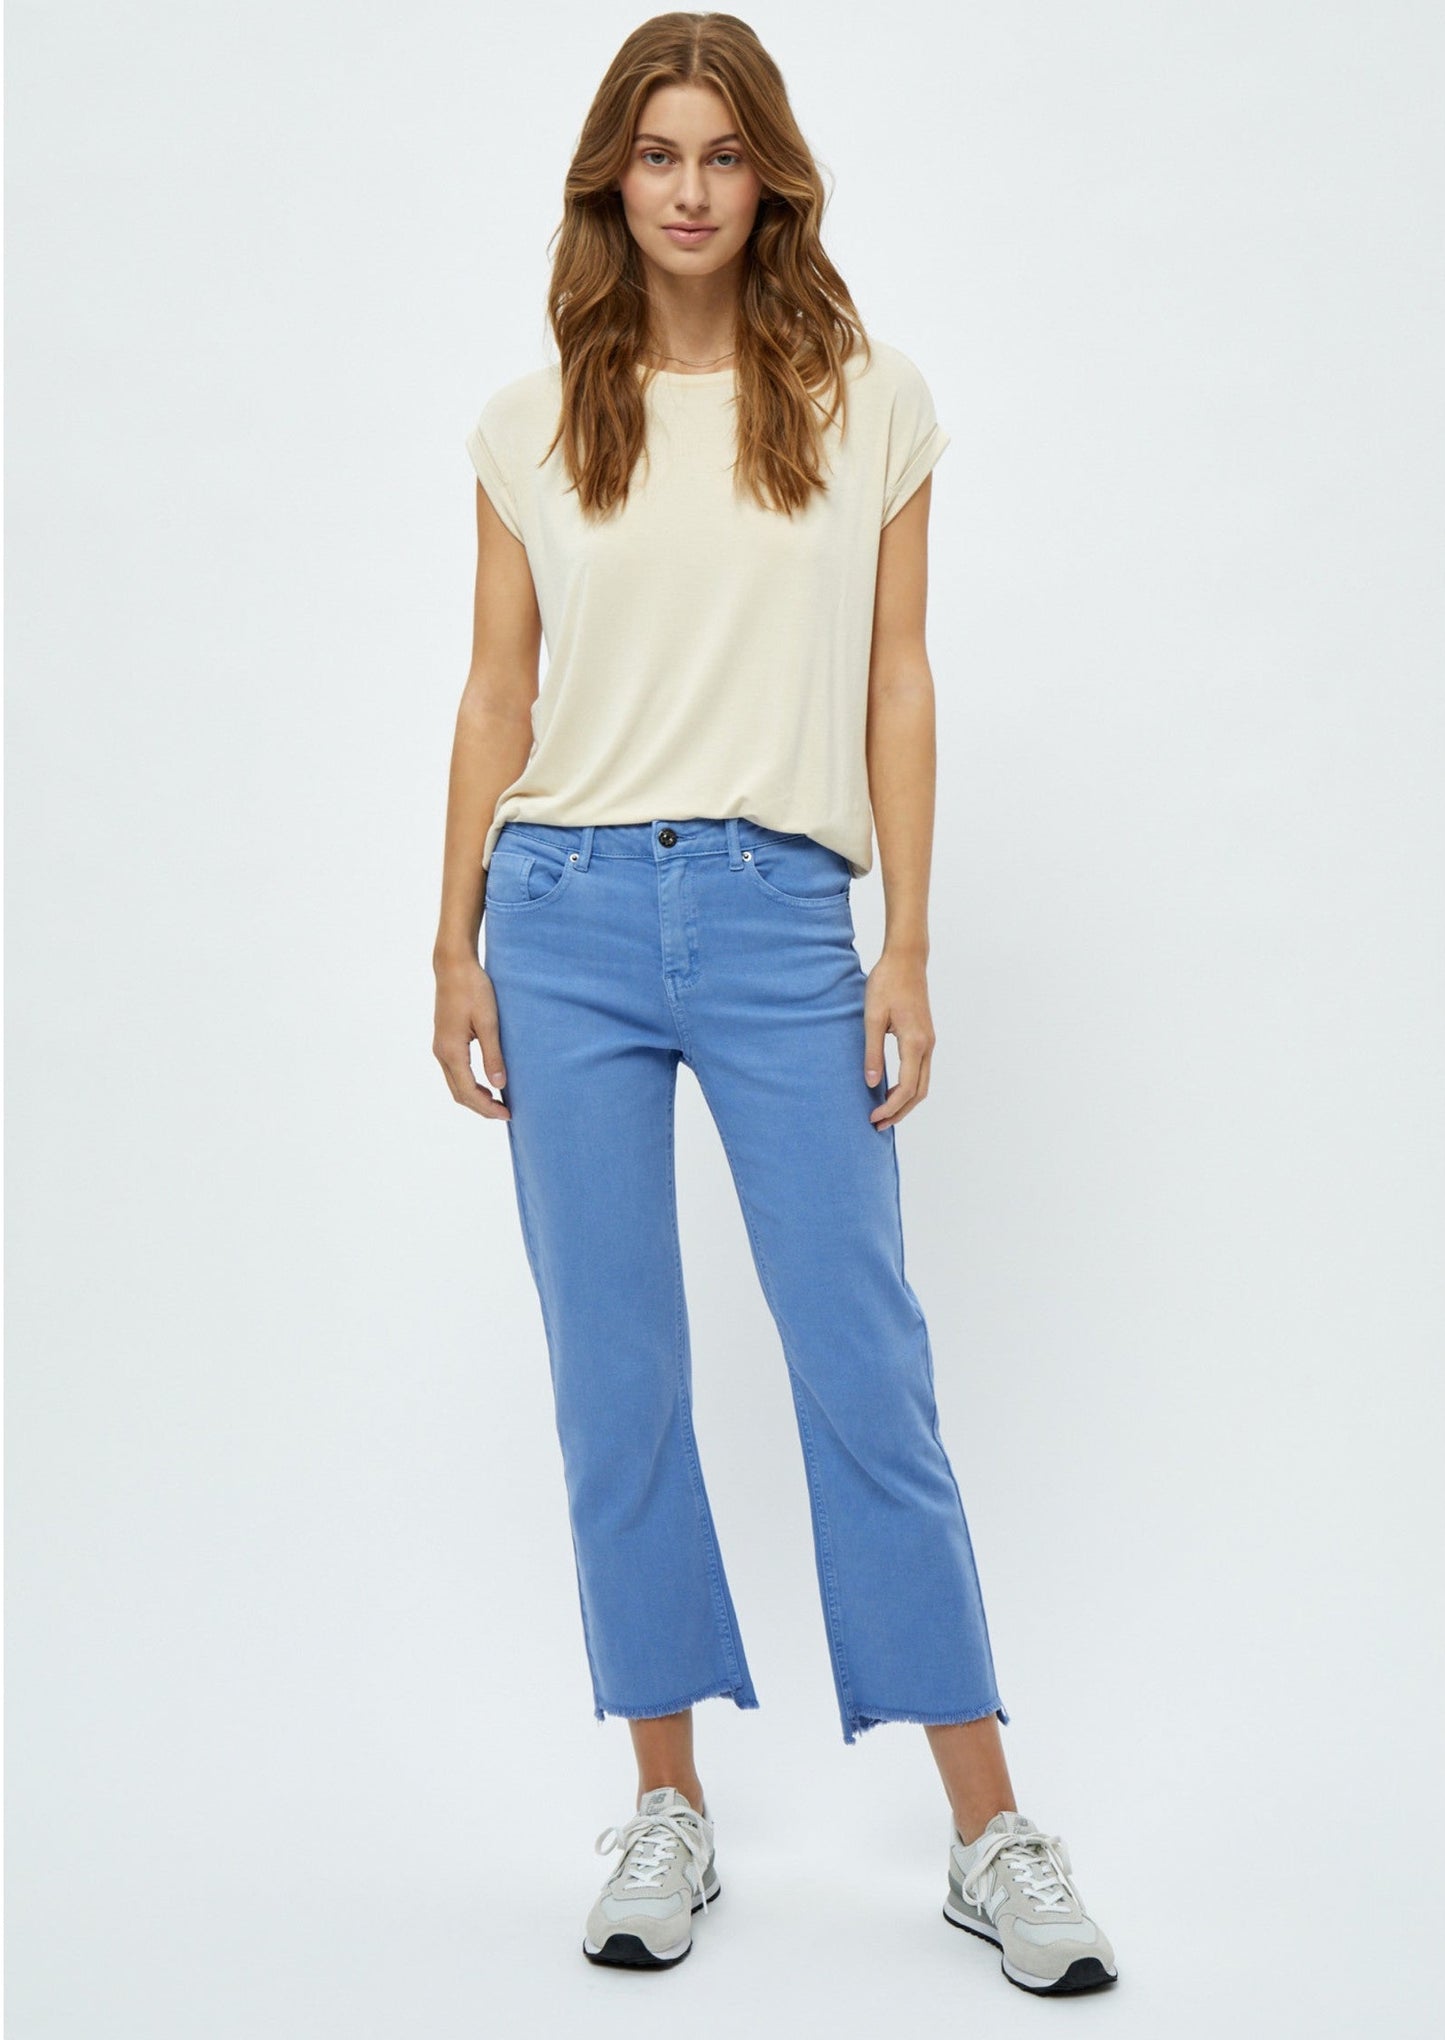 Fione Cropped Jeans